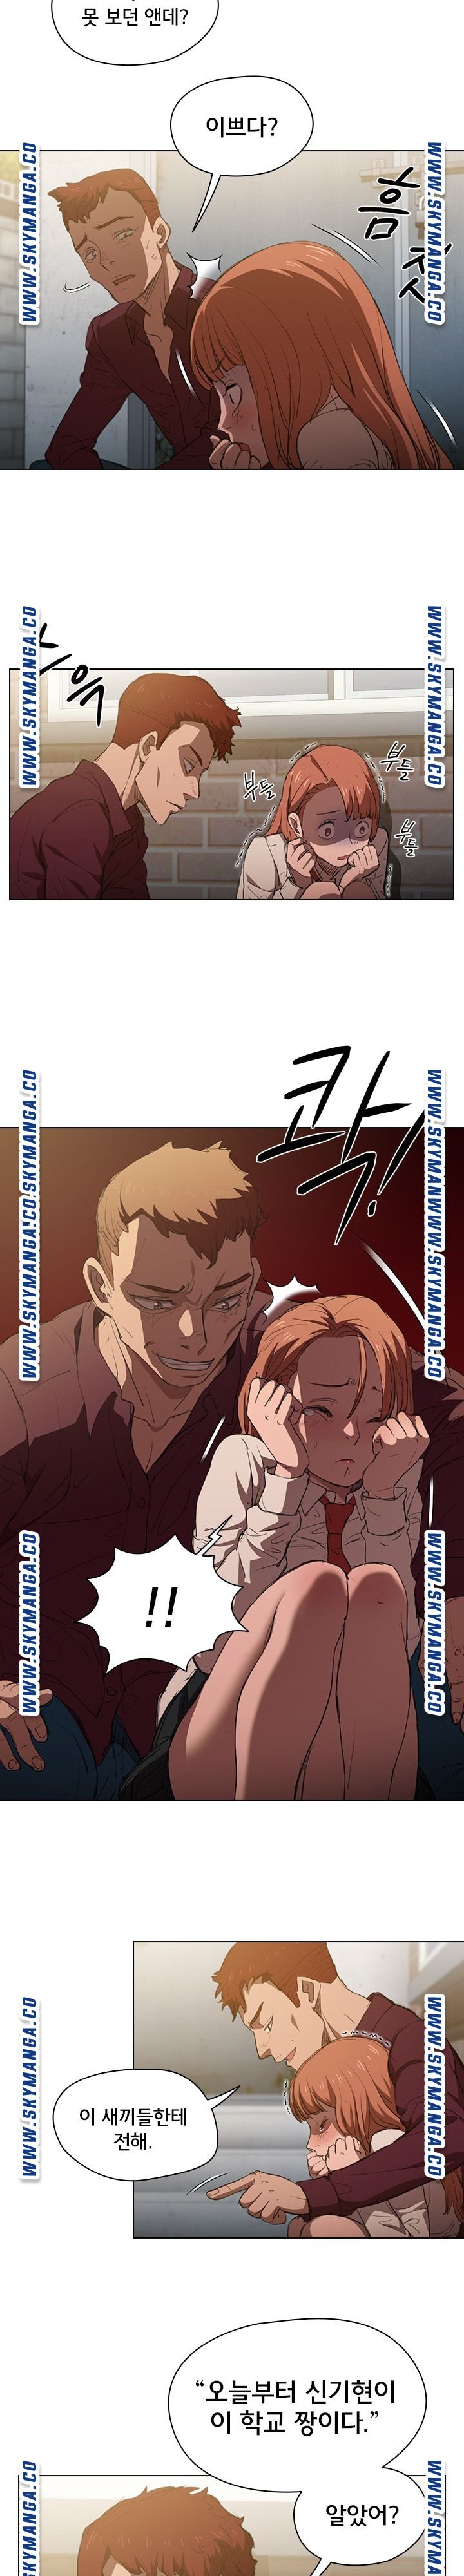 how-about-getting-lost-raw-chap-2-10